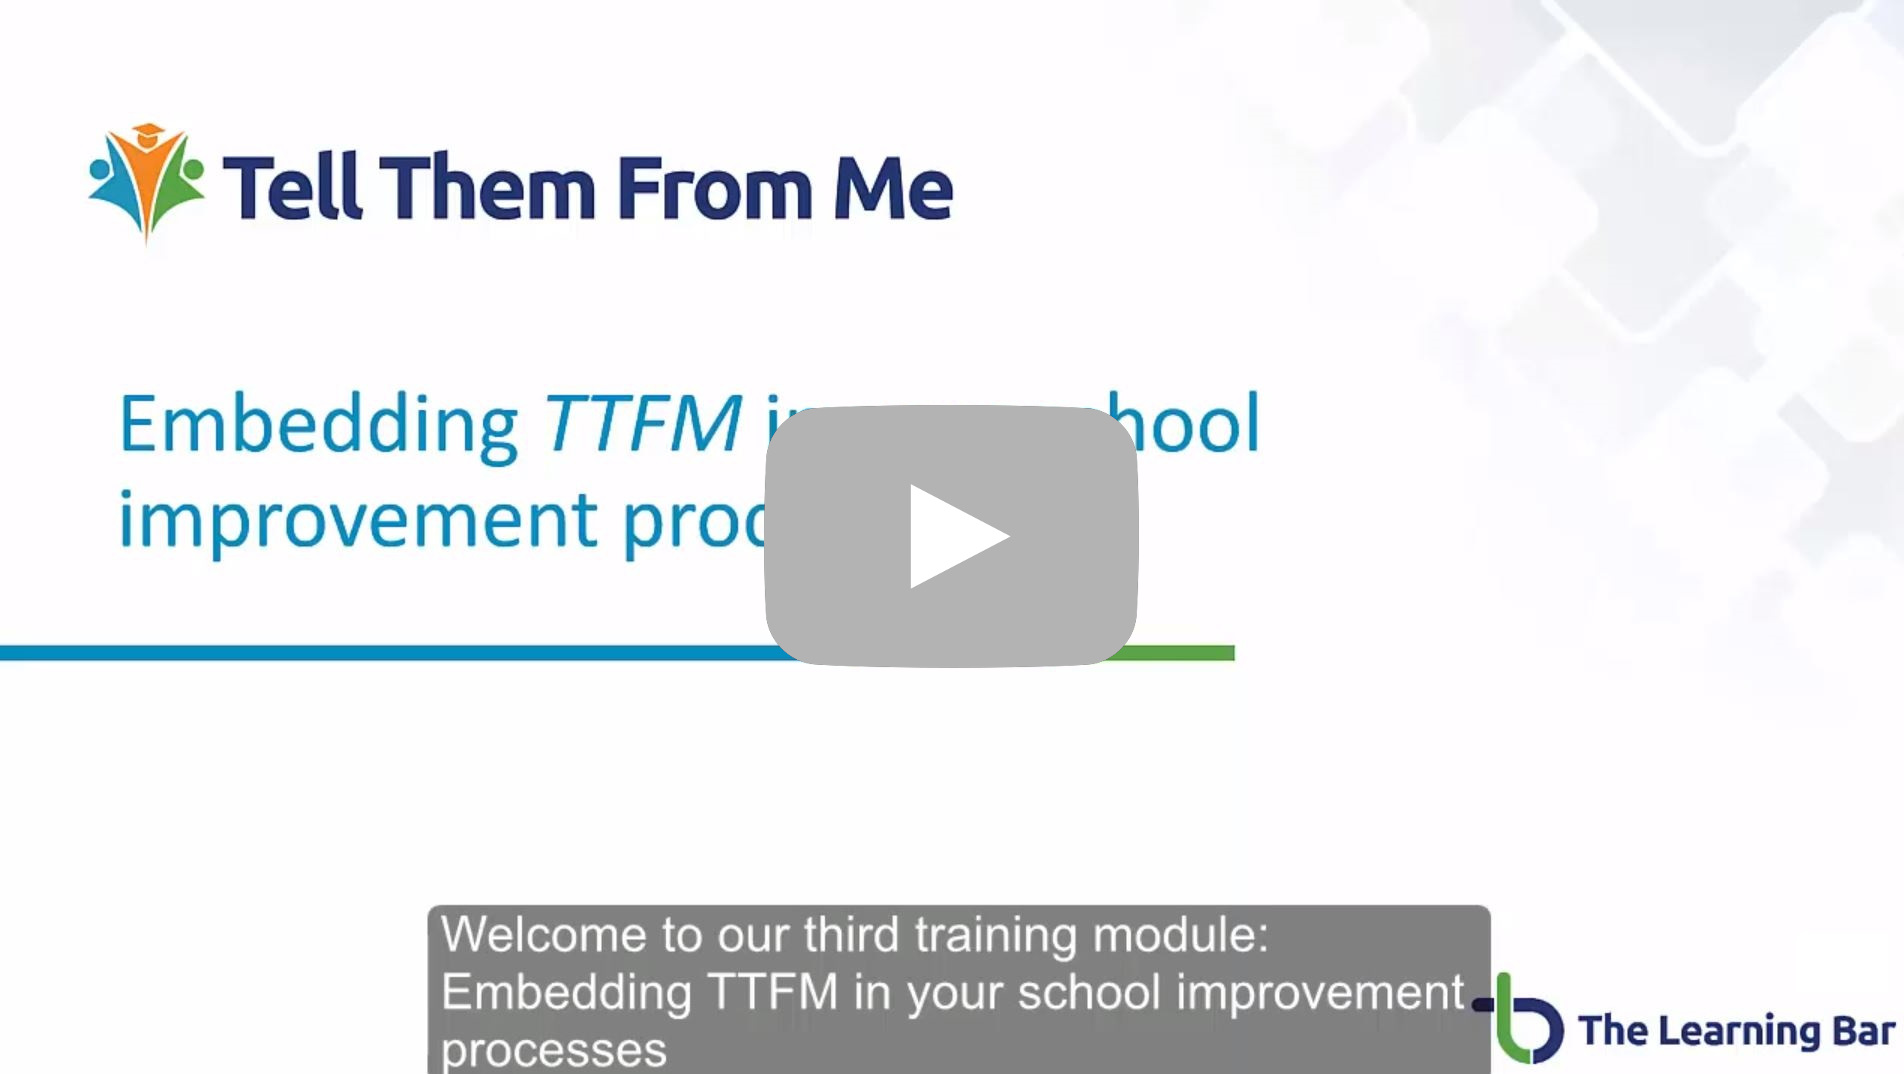 Embedding TTFM in your school improvement process Video - 16 mins and 21 seconds